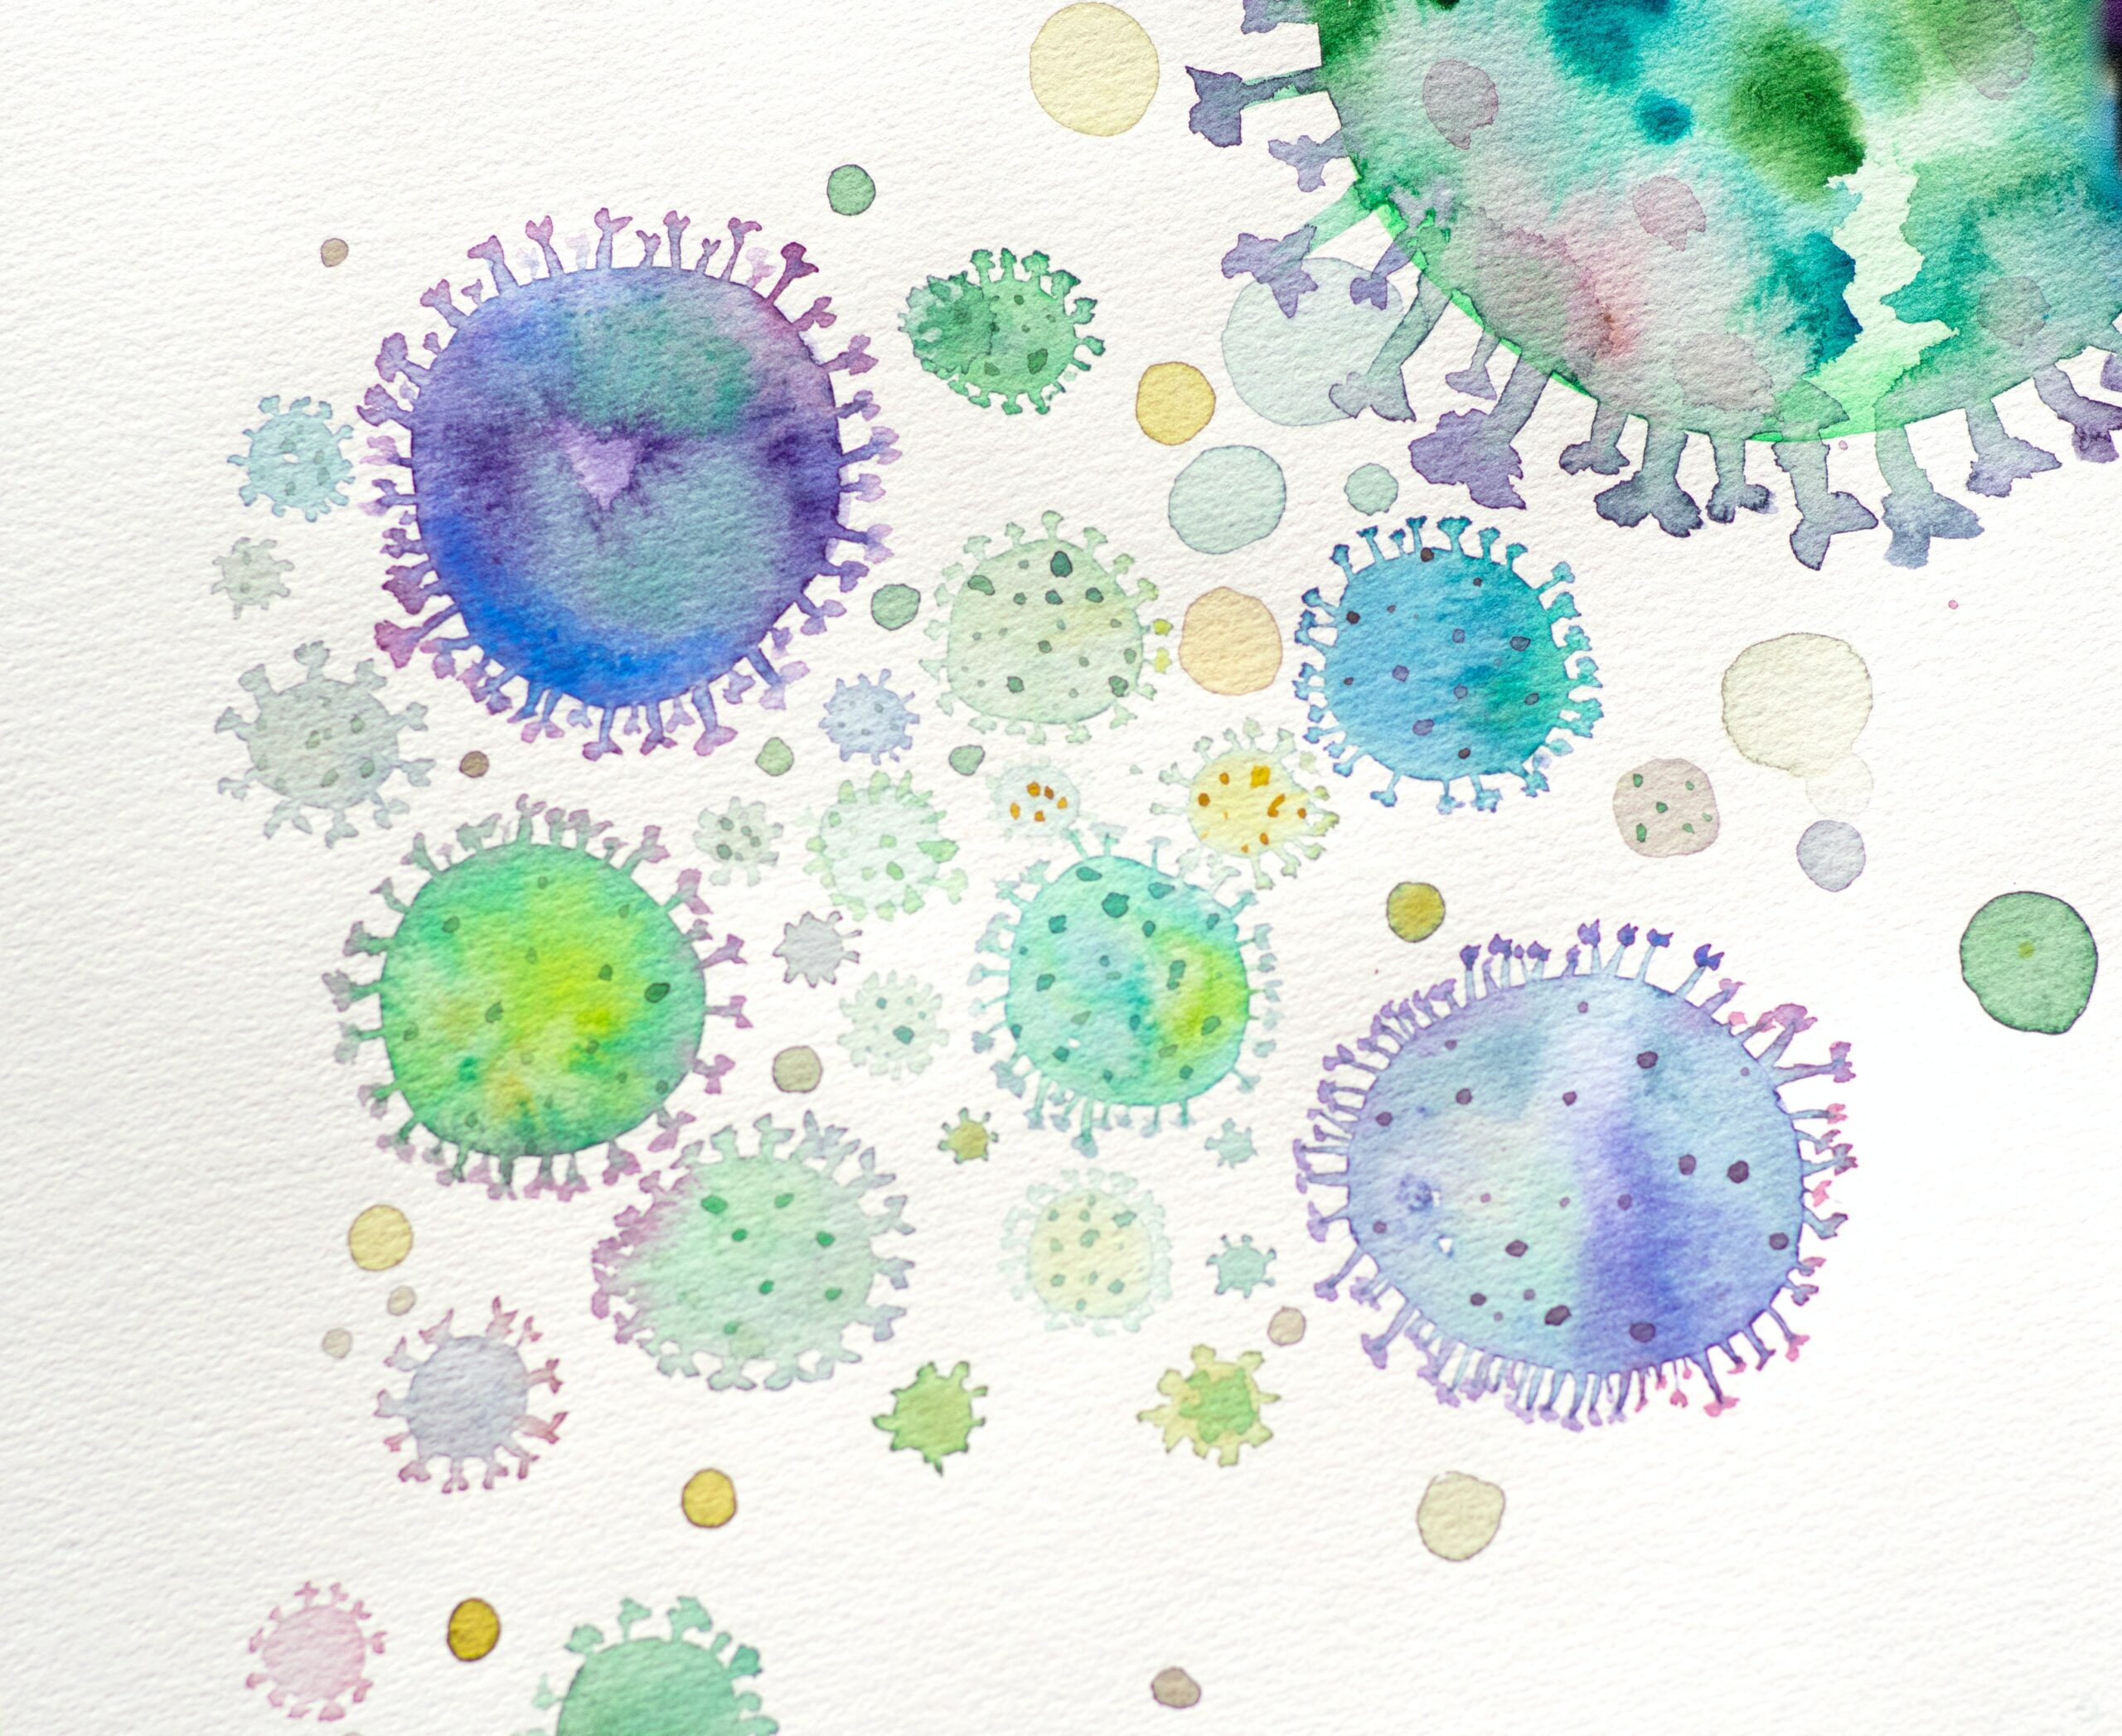 A watercolour painting of Coronaviruses, done in purples, greens, and blues.